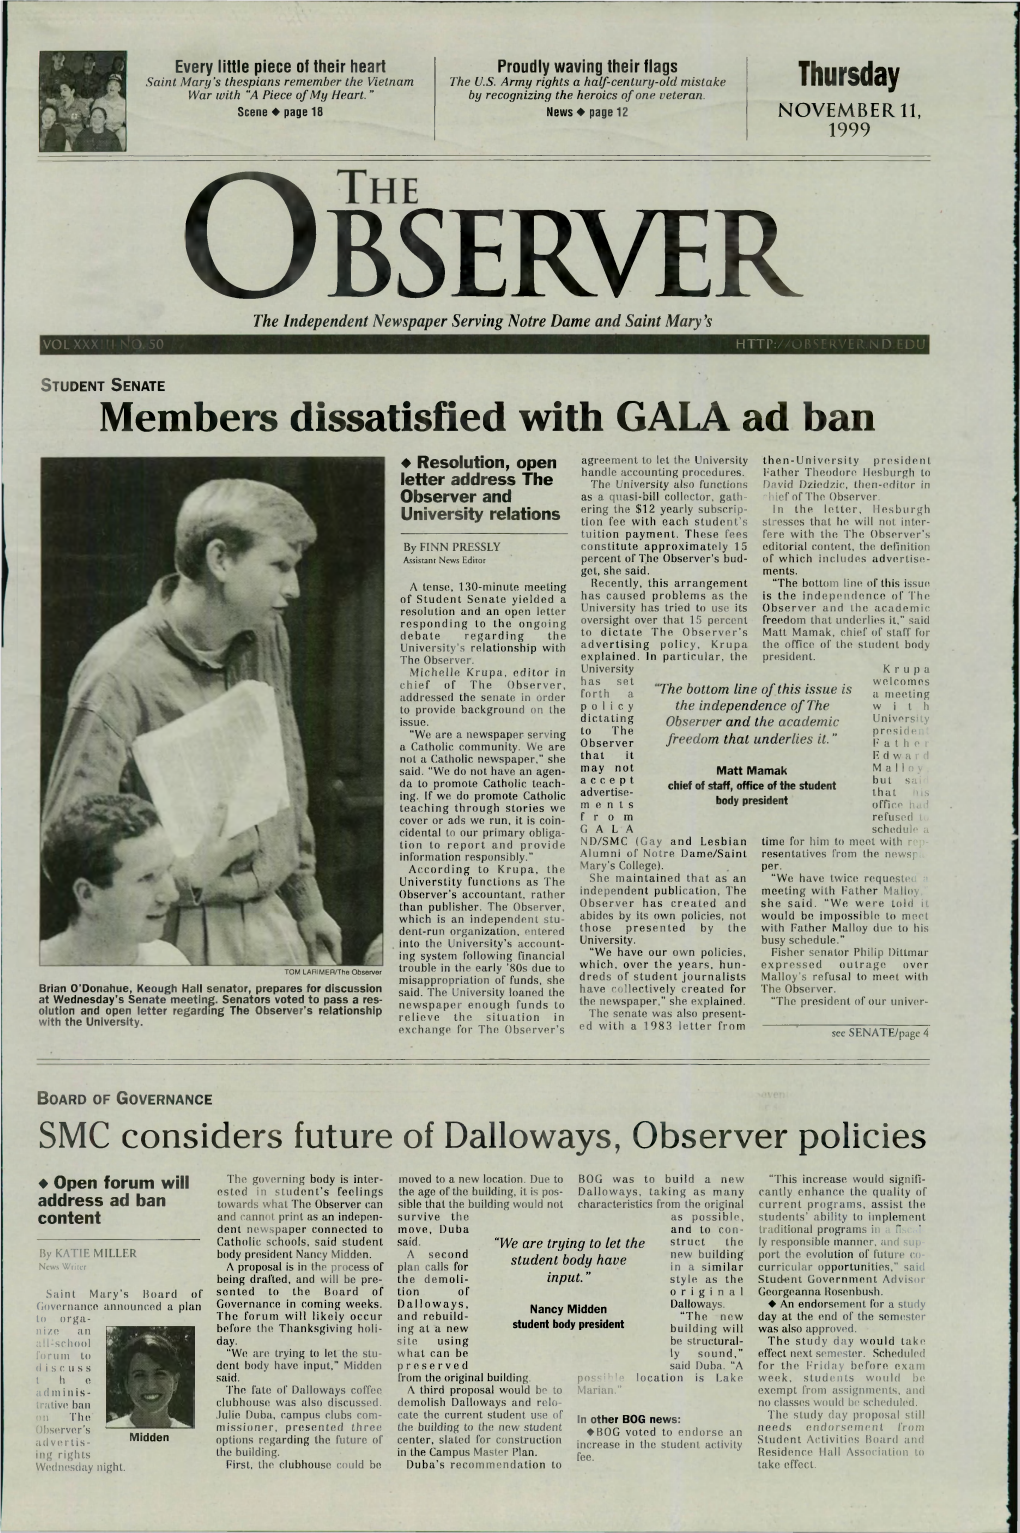 Thursday Members Dissatisfied with GALA Ad